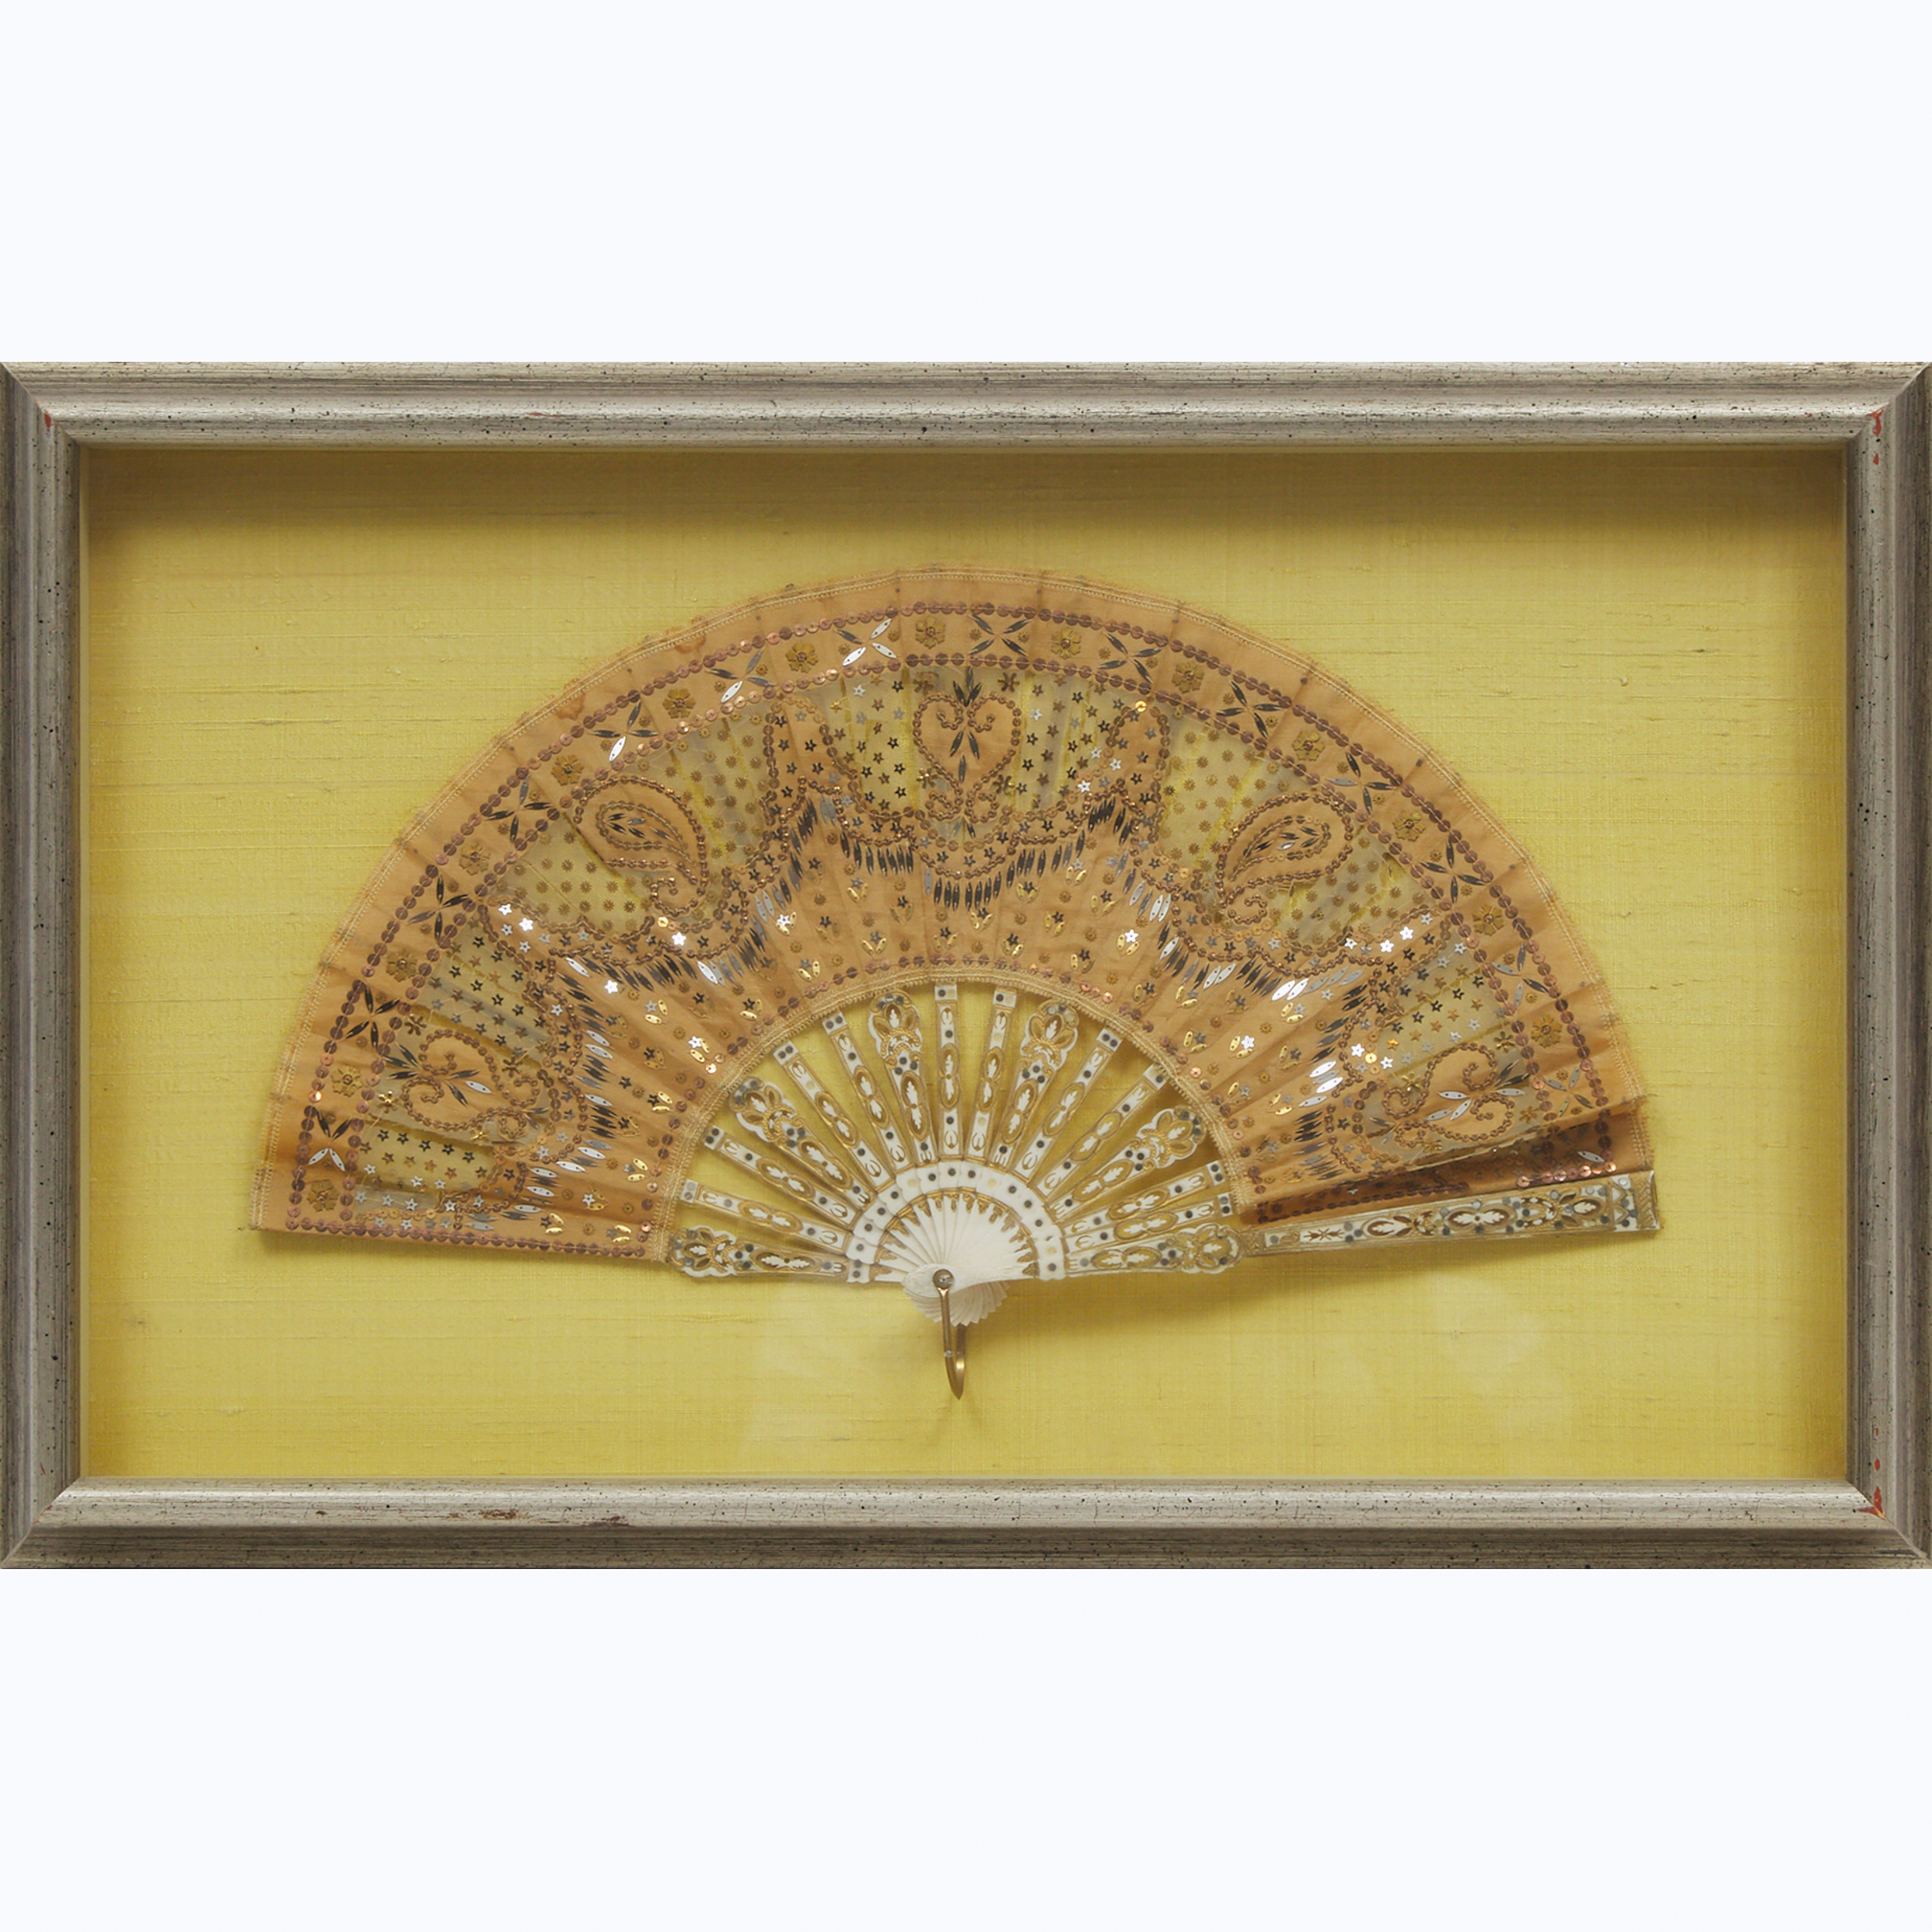 Frame Cased French Sequined Silk Fan, early 20th century